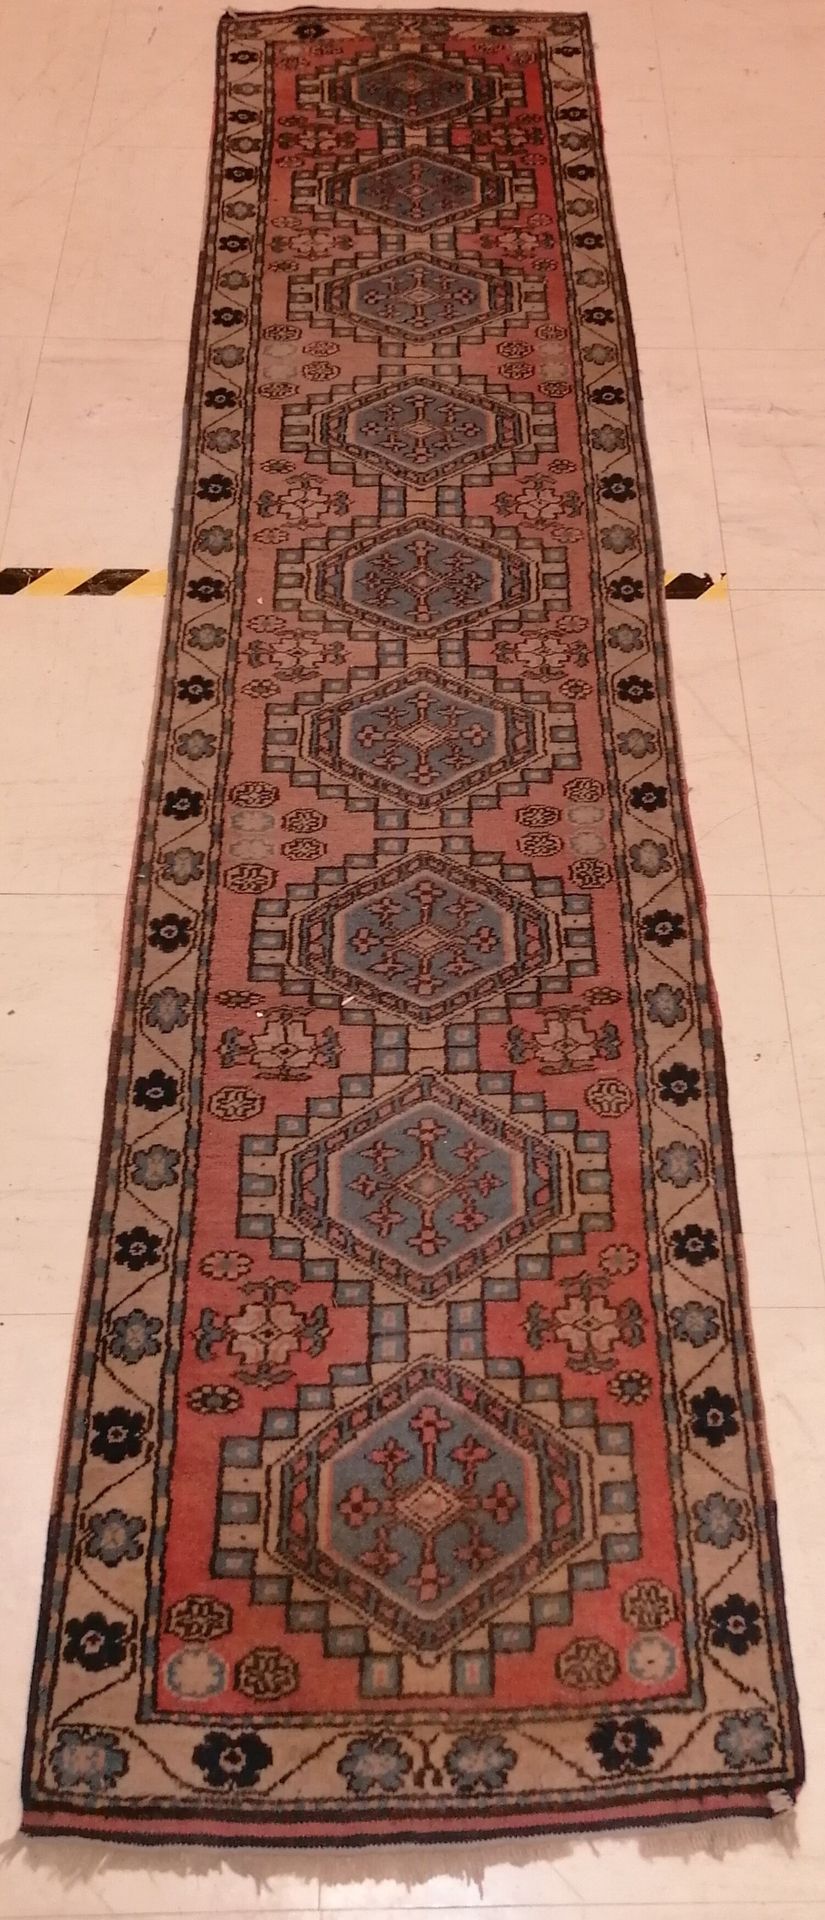 Null WOOL CHANNEL decorated with medallions. 280 x 65 cm

Wear of use